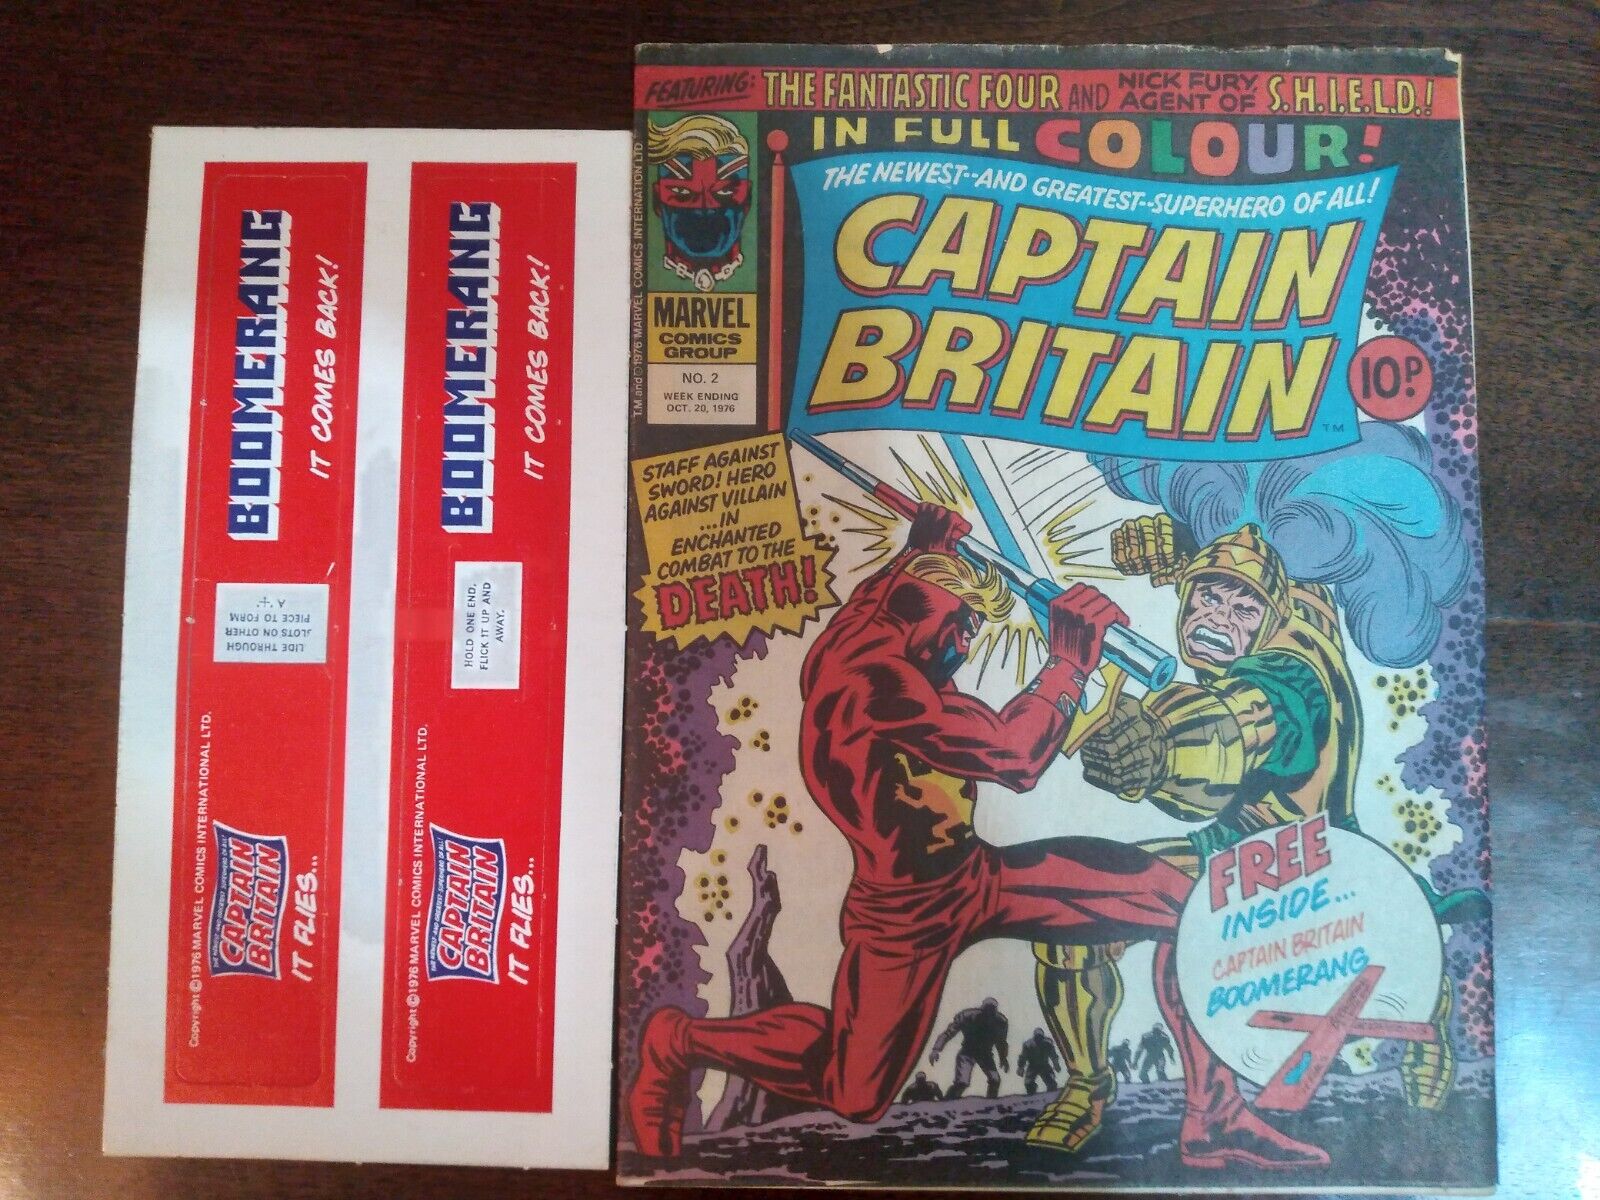 CAPTAIN BRITAIN # 2   FN    COMPLETE WITH CAPTAIN BRITAIN BOOMERANG   OCT 1976